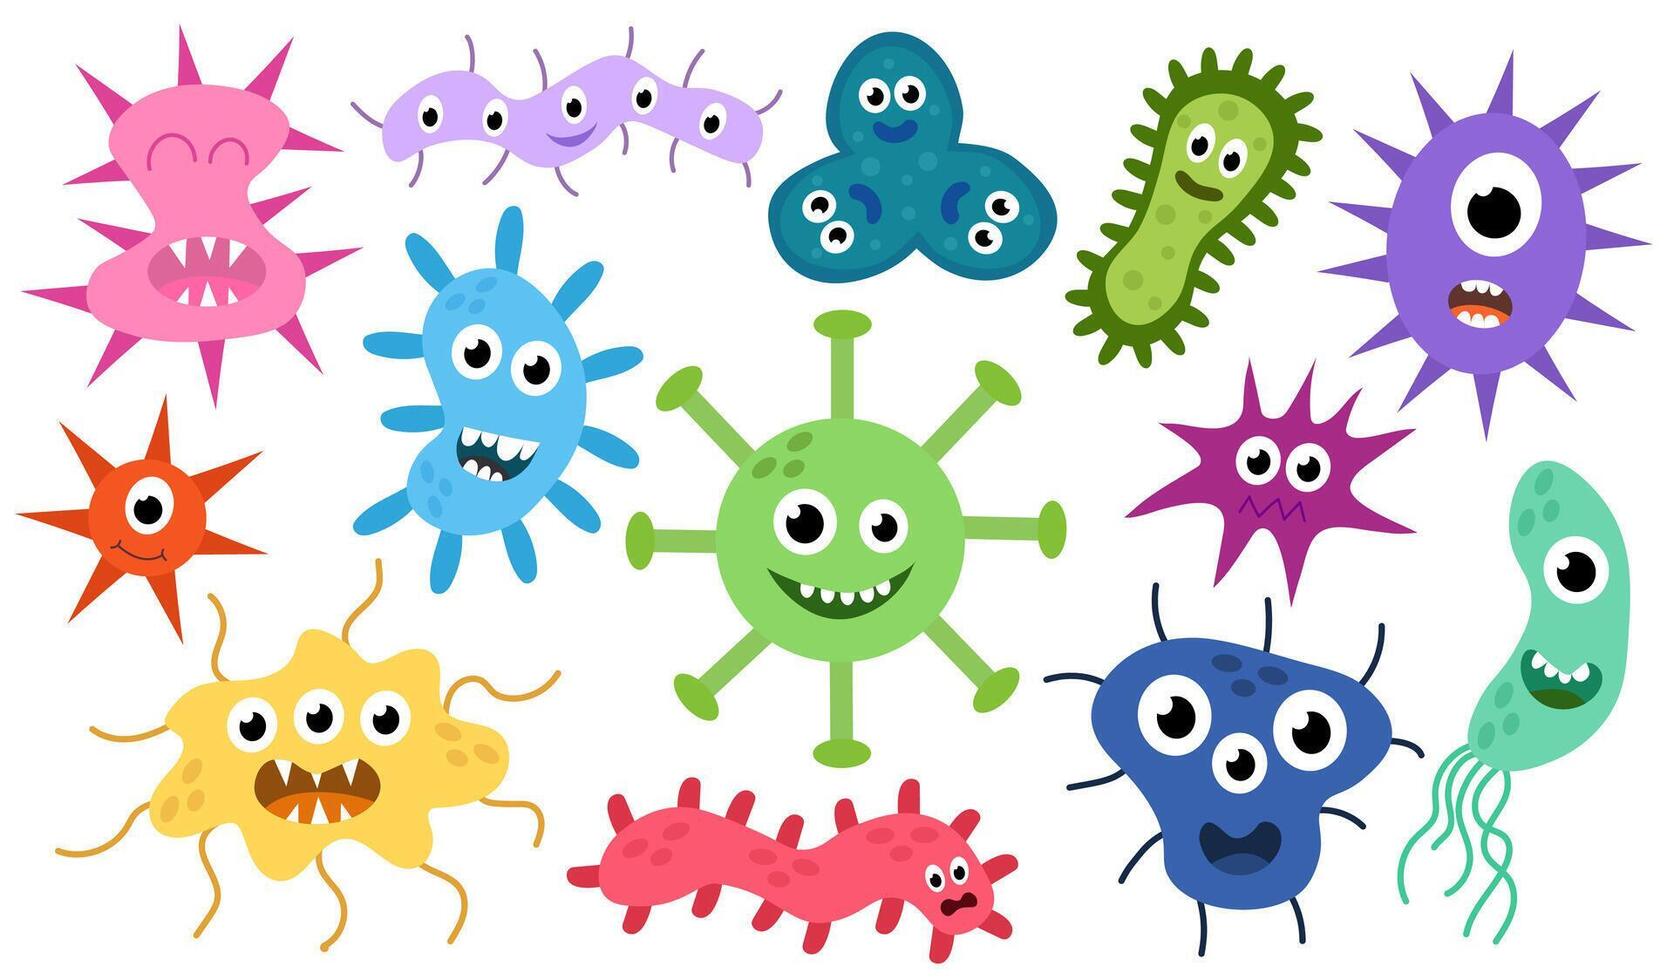 Cute cartoon characters virus, bacteria, microbe, germs set. Microbiology organism of different types of colorful and shapes. Mascots expressing emotions. children illustration in flat design. vector